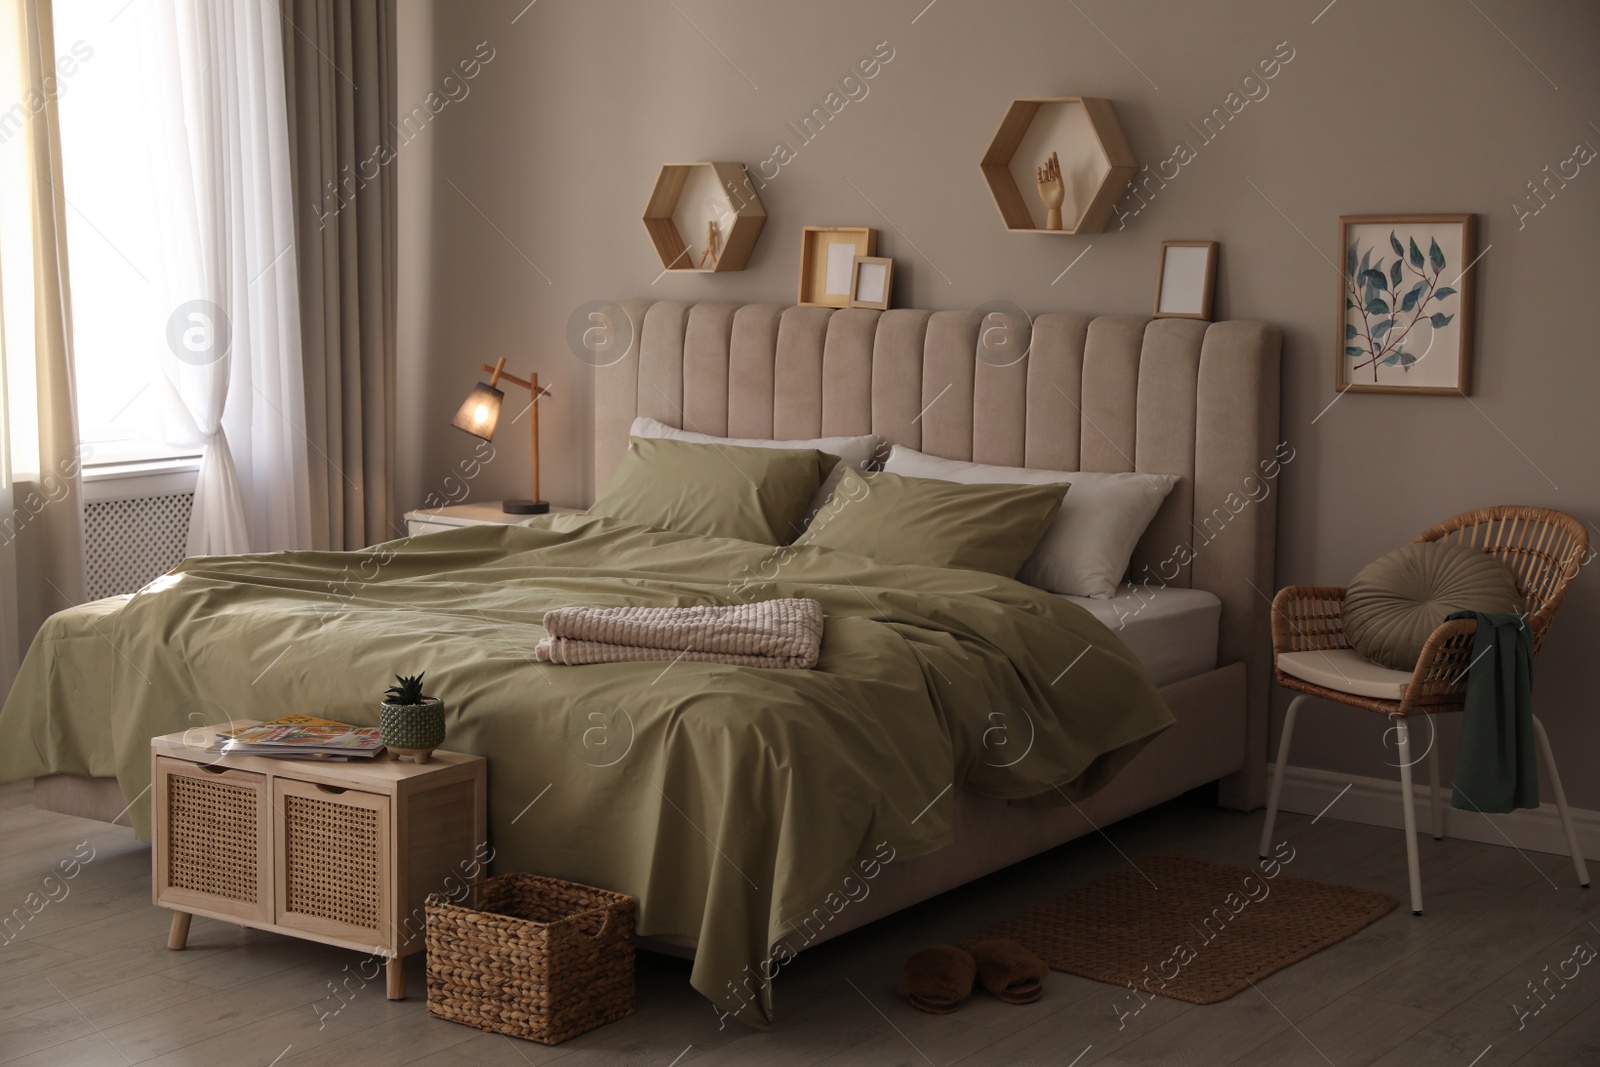 Photo of Large comfortable bed with beautiful linens in room